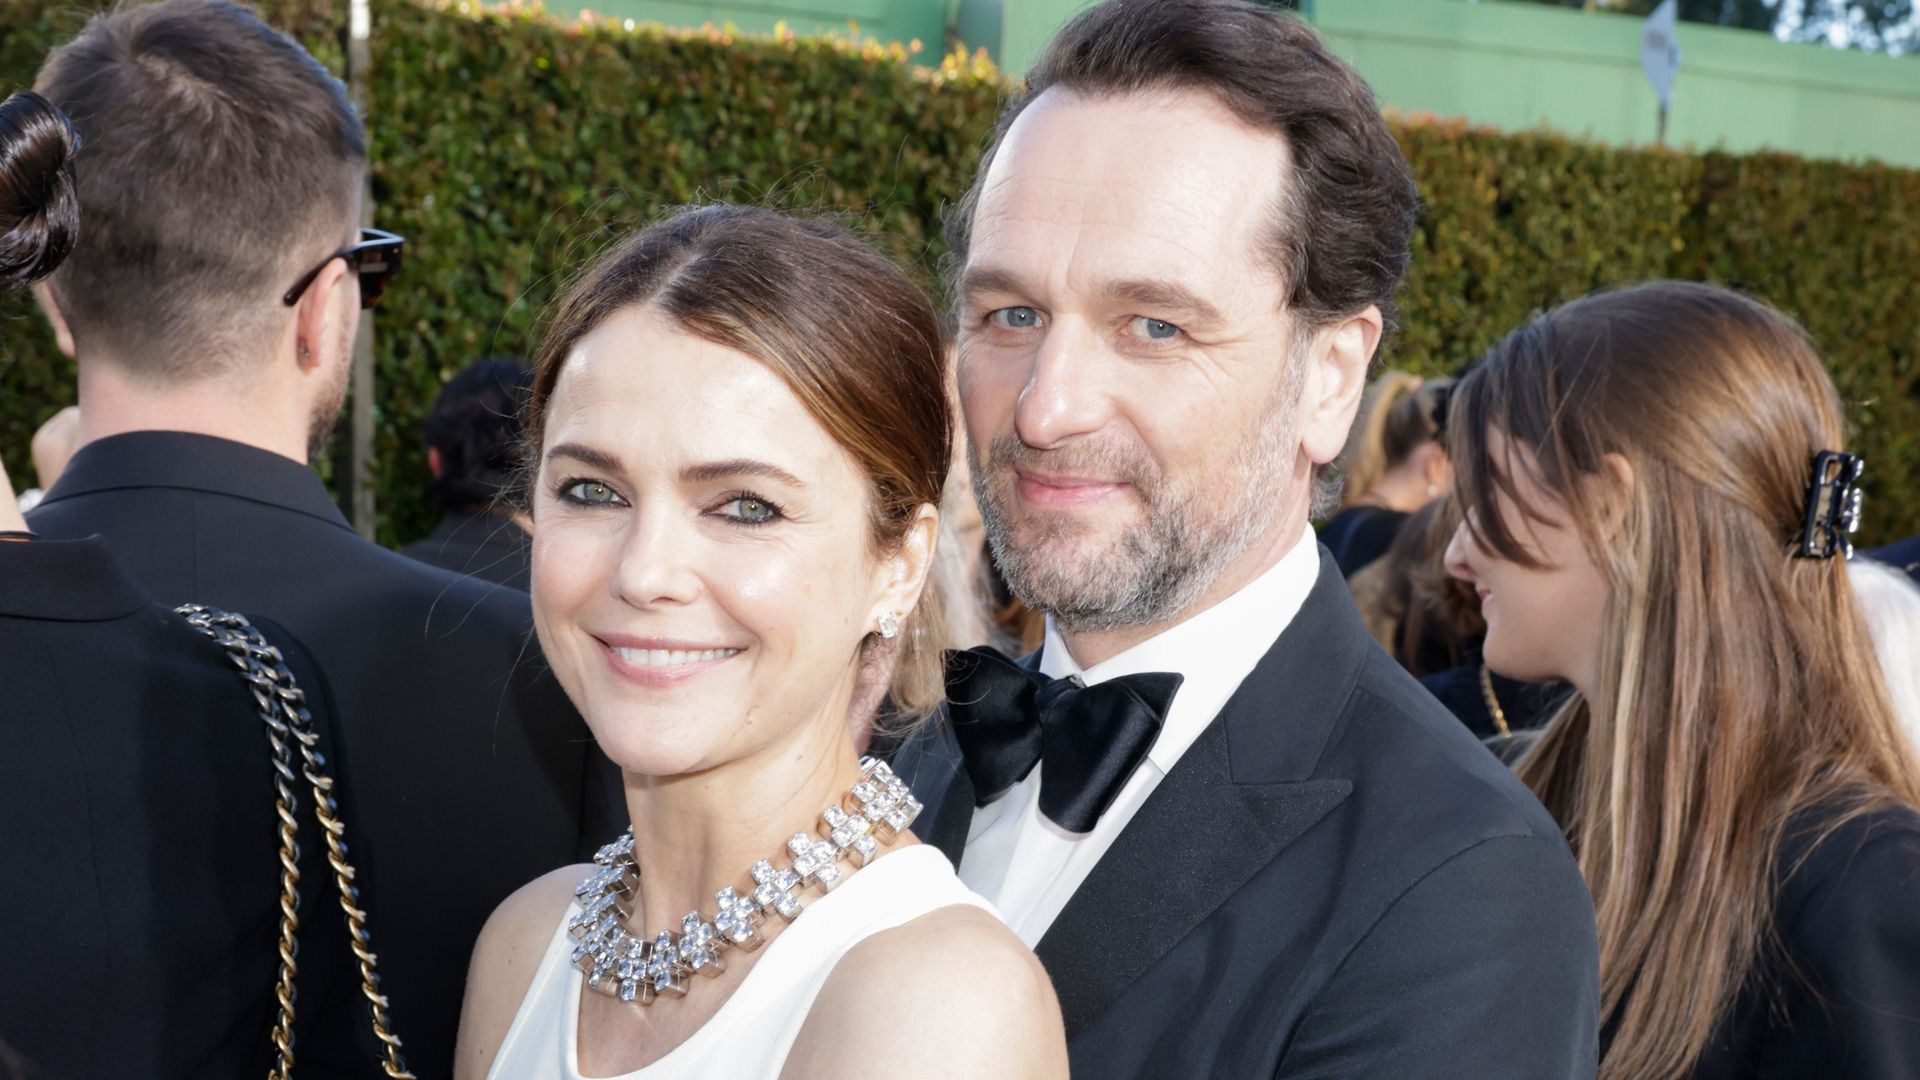 Keri Russell and Matthew Rhys hugging at the Golden Globes